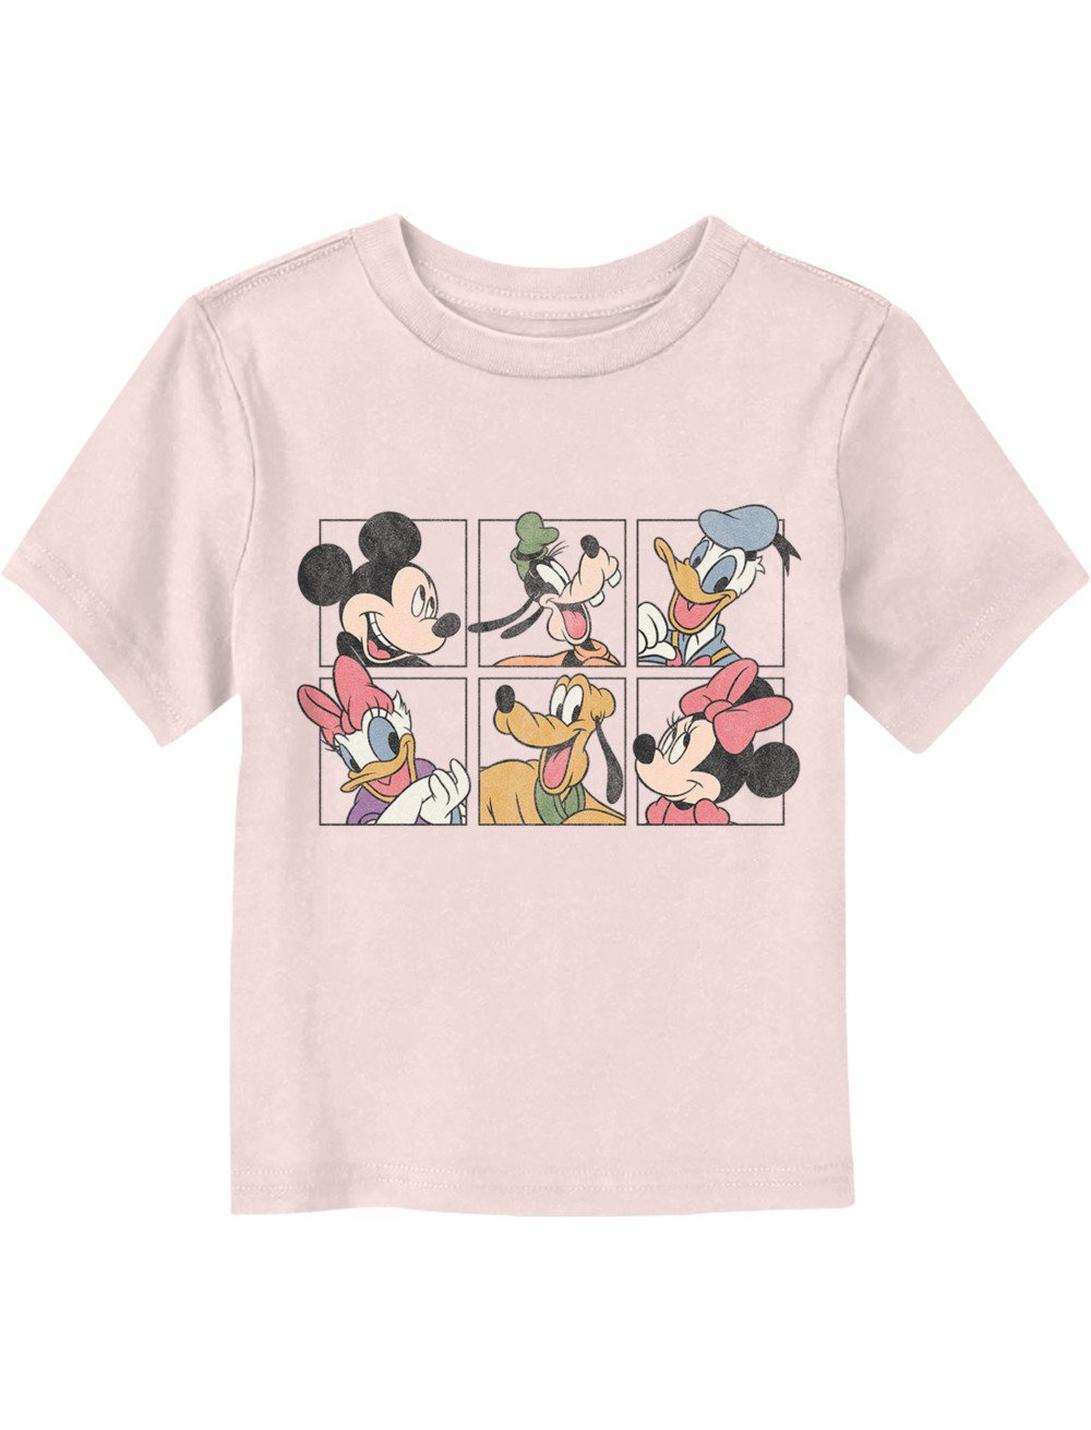 Disney Mickey Mouse And Friends Grid Toddler T-Shirt, LIGHT PINK, hi-res